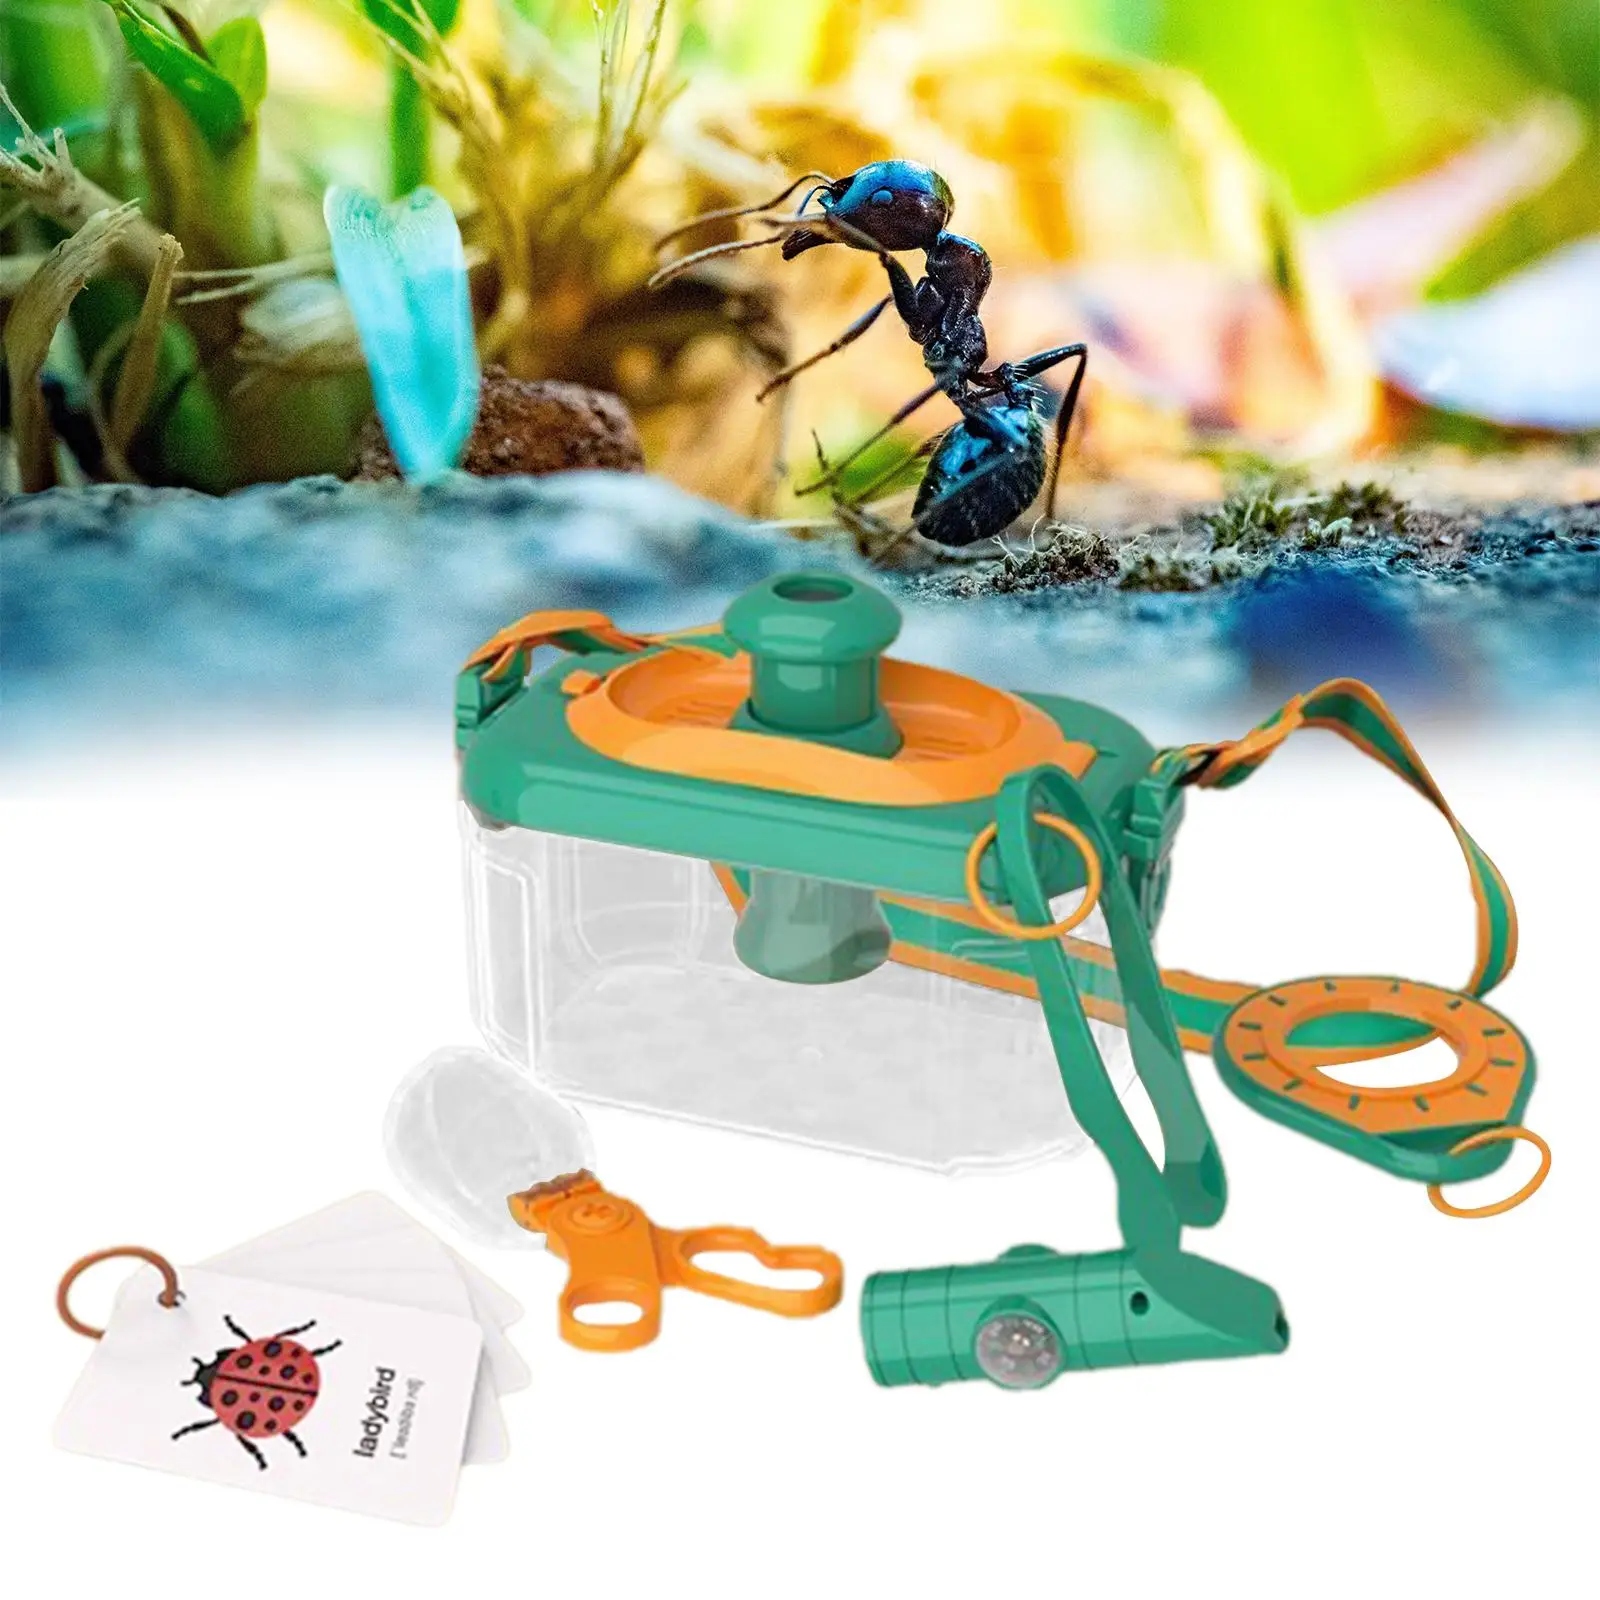 Portable Explorer Kit Educational Learning Toy Insect Observation Container Bugs Collection Kit for Kids Toddlers